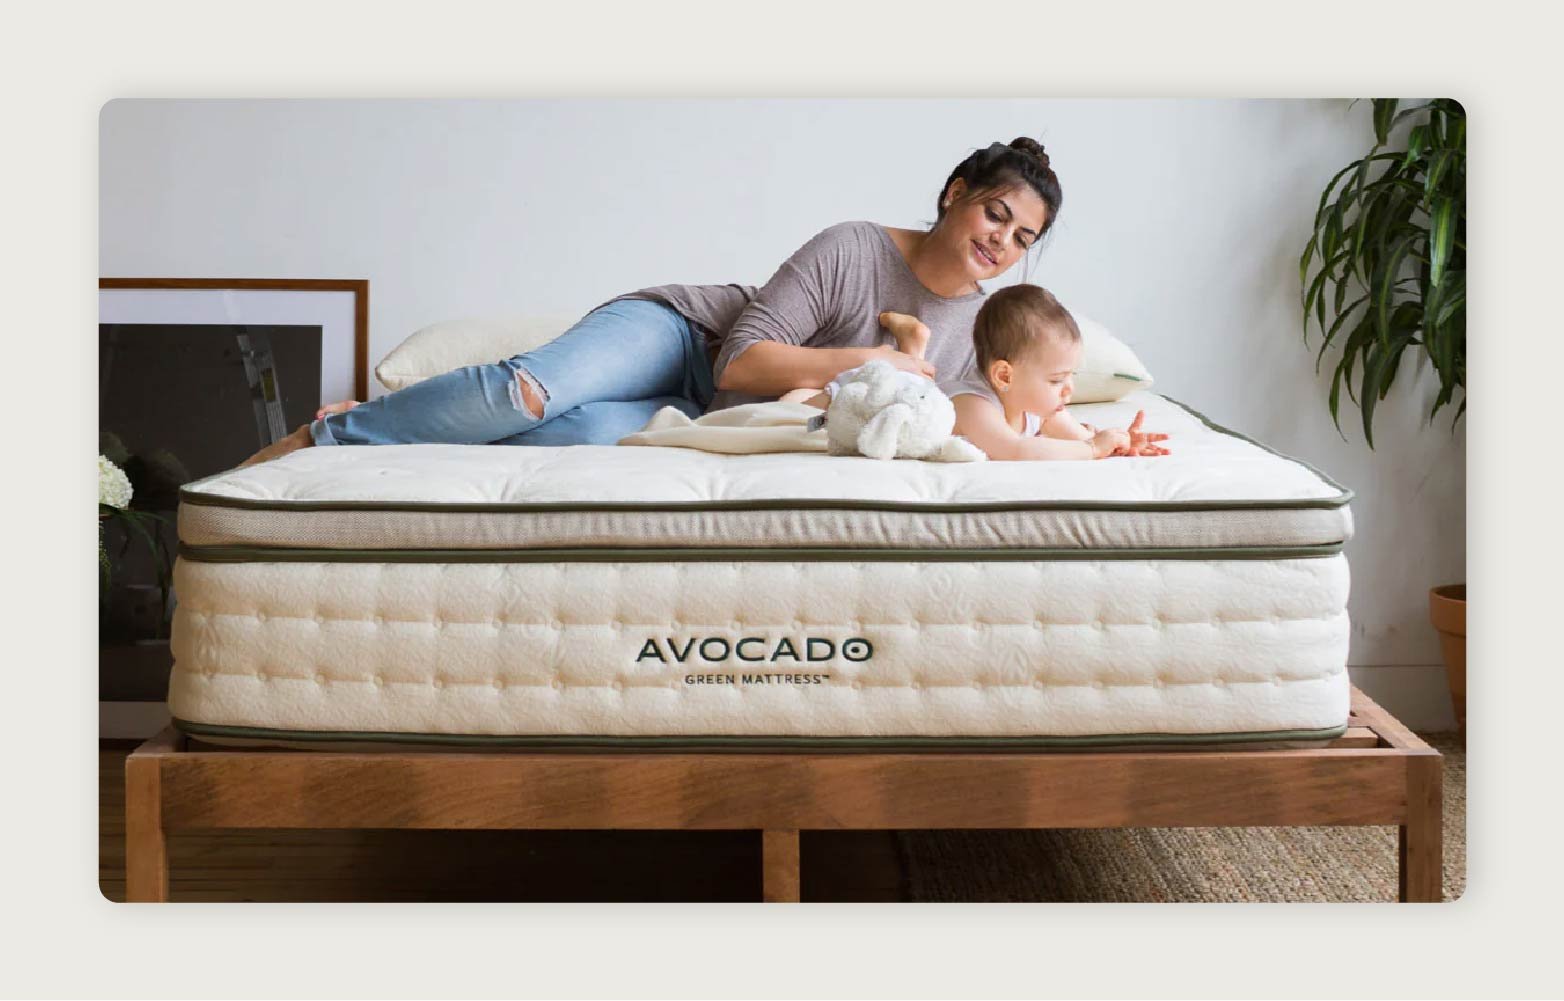 A woman and her baby lying on top of an Avocado Green Mattress with a painting and plant behind them.